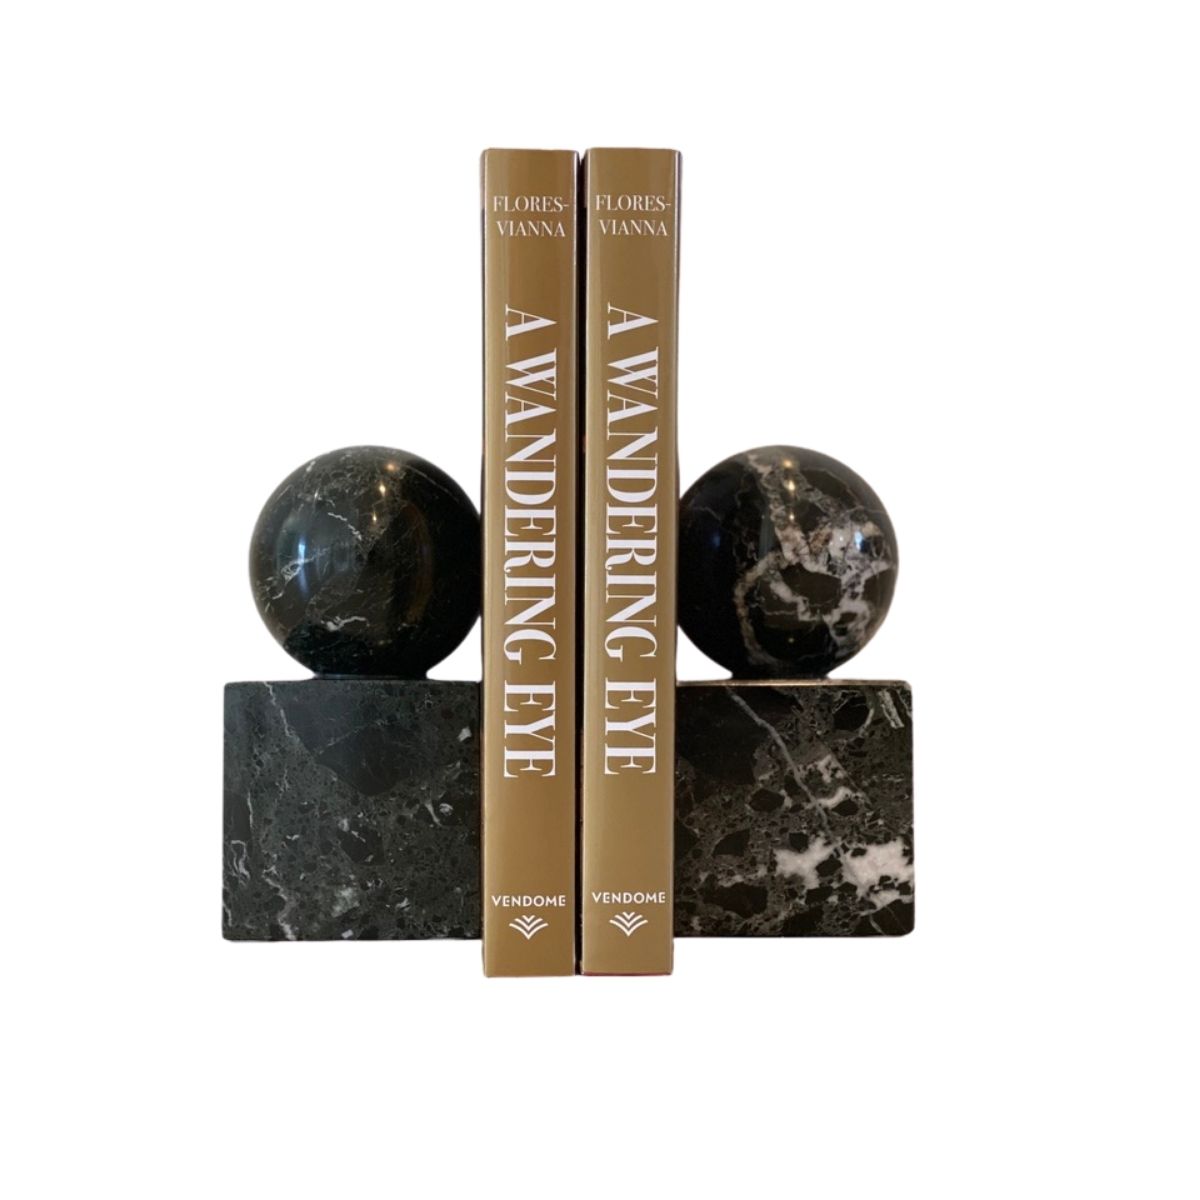 Black Polished Marble Bookends